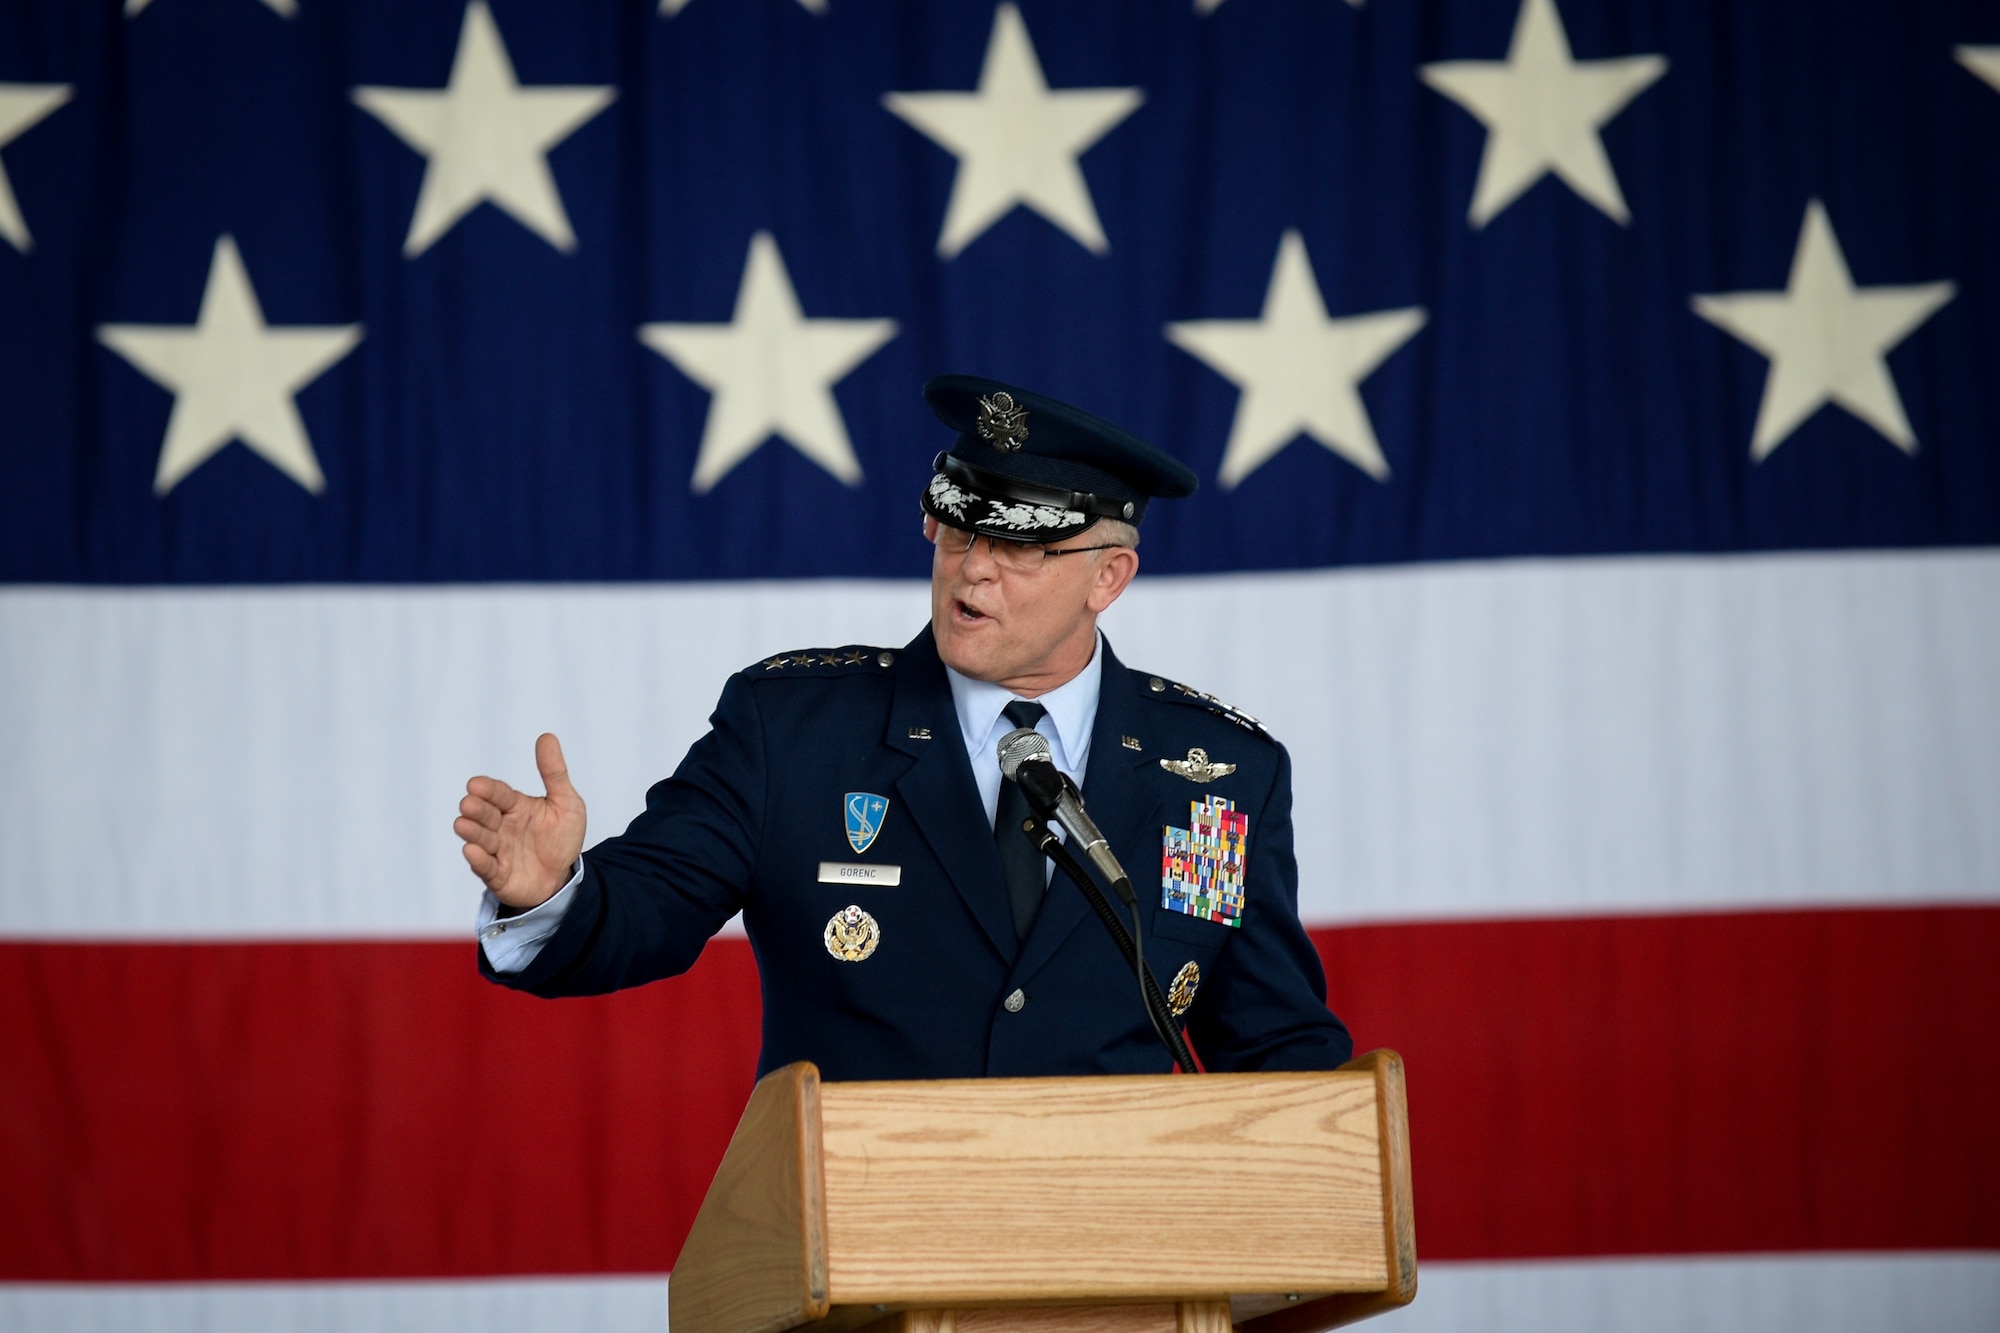 Gen. Frank Gorenc, U.S. Air Forces in Europe and U.S. Air Forces Africa commander, speaks during the Third Air Force and 17th Expeditionary Air Force change of command ceremony July 2, 2015, at Ramstein Air Base, Germany.  Lt. Gen. Timothy M. Ray assumed command after arriving from his previous position as the Office of the Assistant Secretary of the Air Force for Acquisition, Headquarters U.S. Air Force, Global Power Programs director, at the Pentagon, Washington, D.C. (U.S. Air Force photo/Senior Airman Nicole Sikorski) 